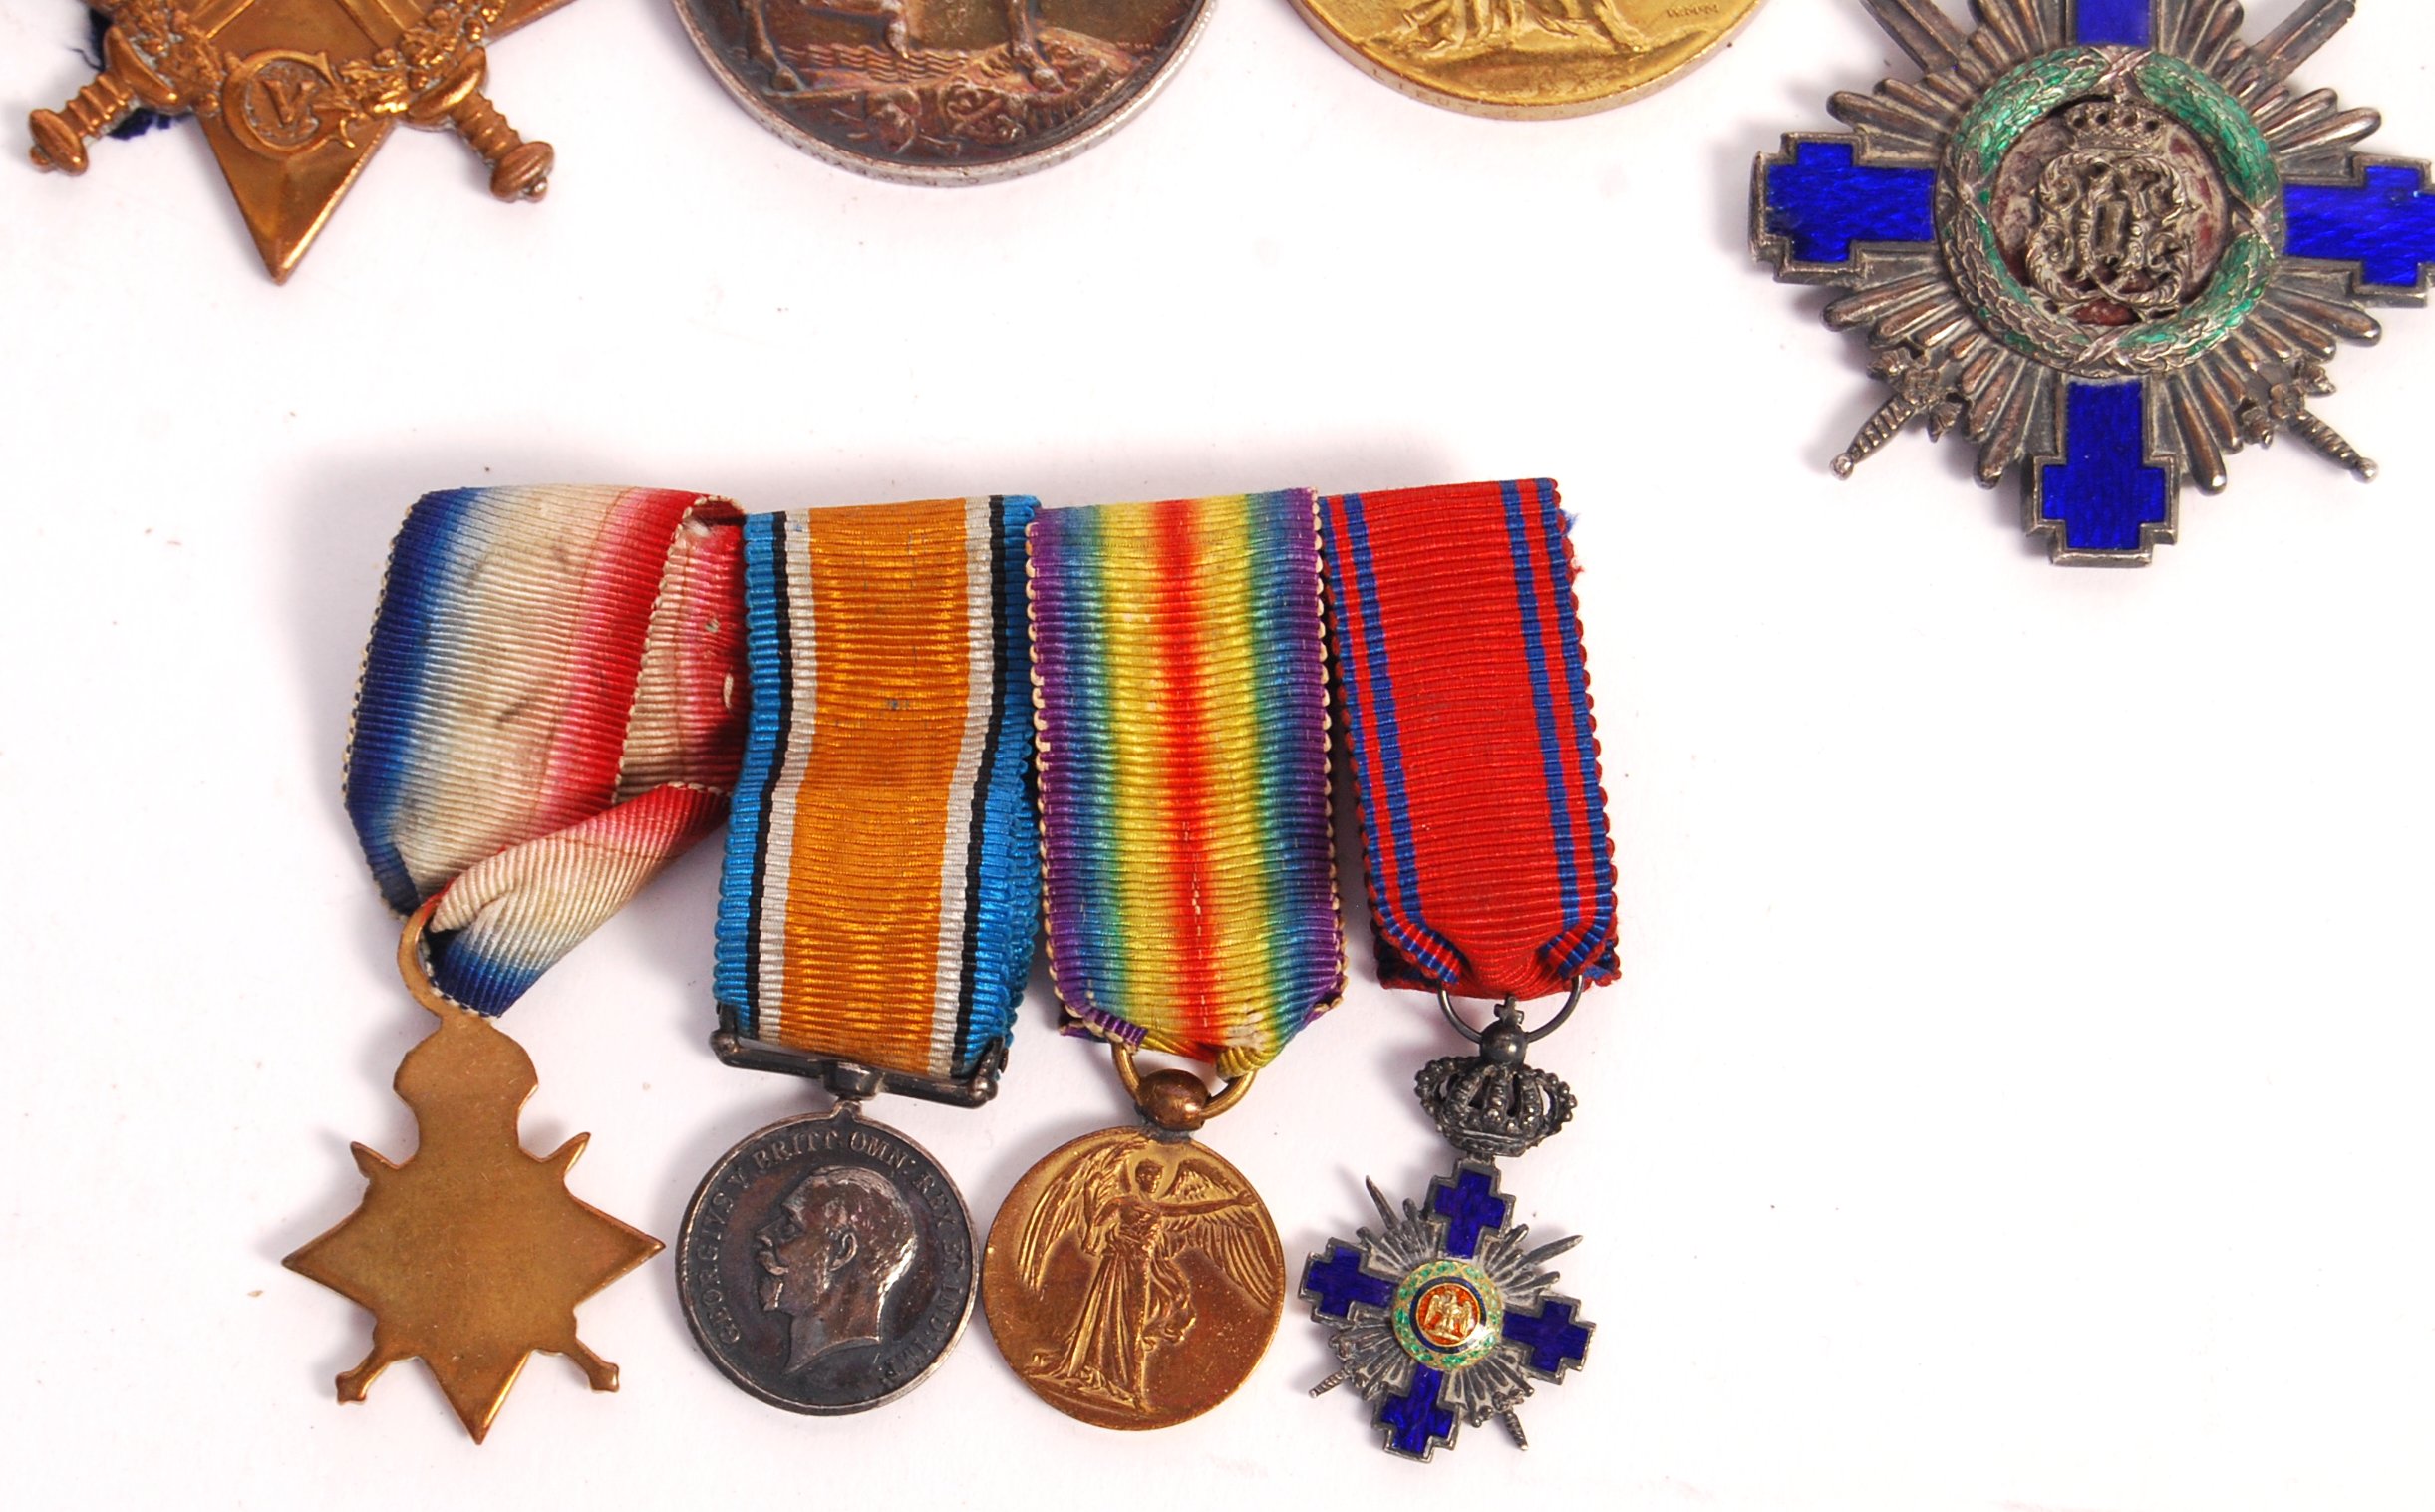 WWI FIRST WORLD WAR MEDAL GROUP - ORDER OF THE STAR OF ROMANIA - Image 3 of 8